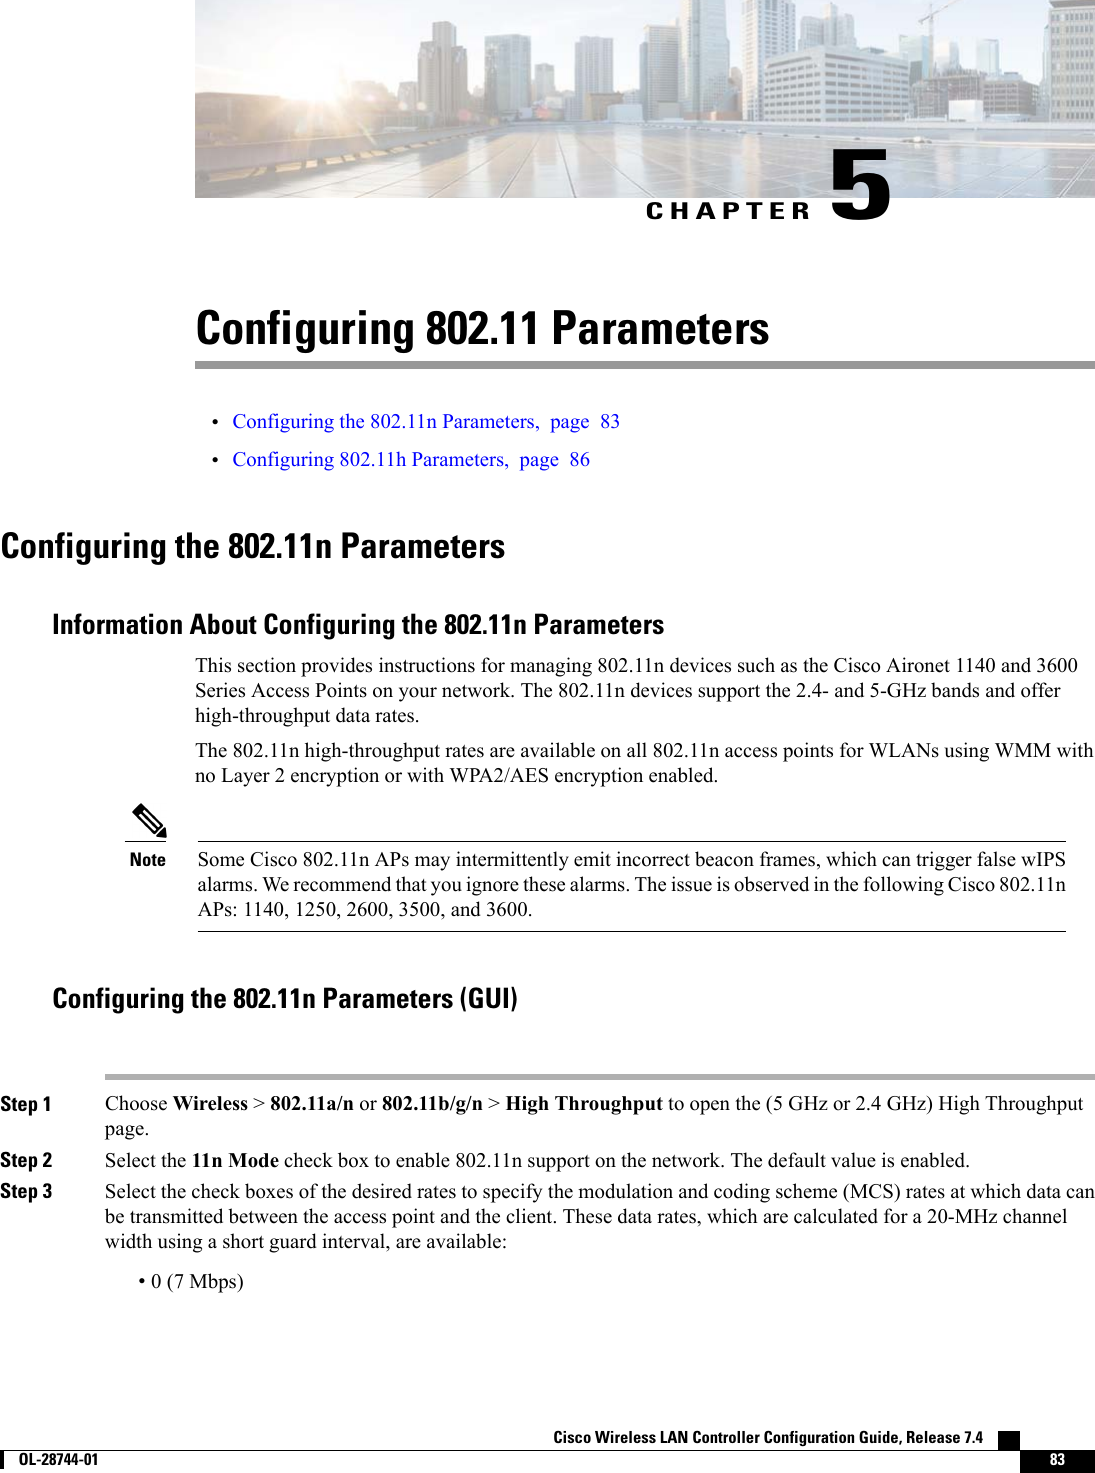 CHAPTER 5Configuring 802.11 Parameters•Configuring the 802.11n Parameters, page 83•Configuring 802.11h Parameters, page 86Configuring the 802.11n ParametersInformation About Configuring the 802.11n ParametersThis section provides instructions for managing 802.11n devices such as the Cisco Aironet 1140 and 3600Series Access Points on your network. The 802.11n devices support the 2.4- and 5-GHz bands and offerhigh-throughput data rates.The 802.11n high-throughput rates are available on all 802.11n access points for WLANs using WMM withno Layer 2 encryption or with WPA2/AES encryption enabled.Some Cisco 802.11n APs may intermittently emit incorrect beacon frames, which can trigger false wIPSalarms. We recommend that you ignore these alarms. The issue is observed in the following Cisco 802.11nAPs: 1140, 1250, 2600, 3500, and 3600.NoteConfiguring the 802.11n Parameters (GUI)Step 1 Choose Wireless &gt;802.11a/n or 802.11b/g/n &gt;High Throughput to open the (5 GHz or 2.4 GHz) High Throughputpage.Step 2 Select the 11n Mode check box to enable 802.11n support on the network. The default value is enabled.Step 3 Select the check boxes of the desired rates to specify the modulation and coding scheme (MCS) rates at which data canbe transmitted between the access point and the client. These data rates, which are calculated for a 20-MHz channelwidth using a short guard interval, are available:•0 (7 Mbps)Cisco Wireless LAN Controller Configuration Guide, Release 7.4        OL-28744-01 83